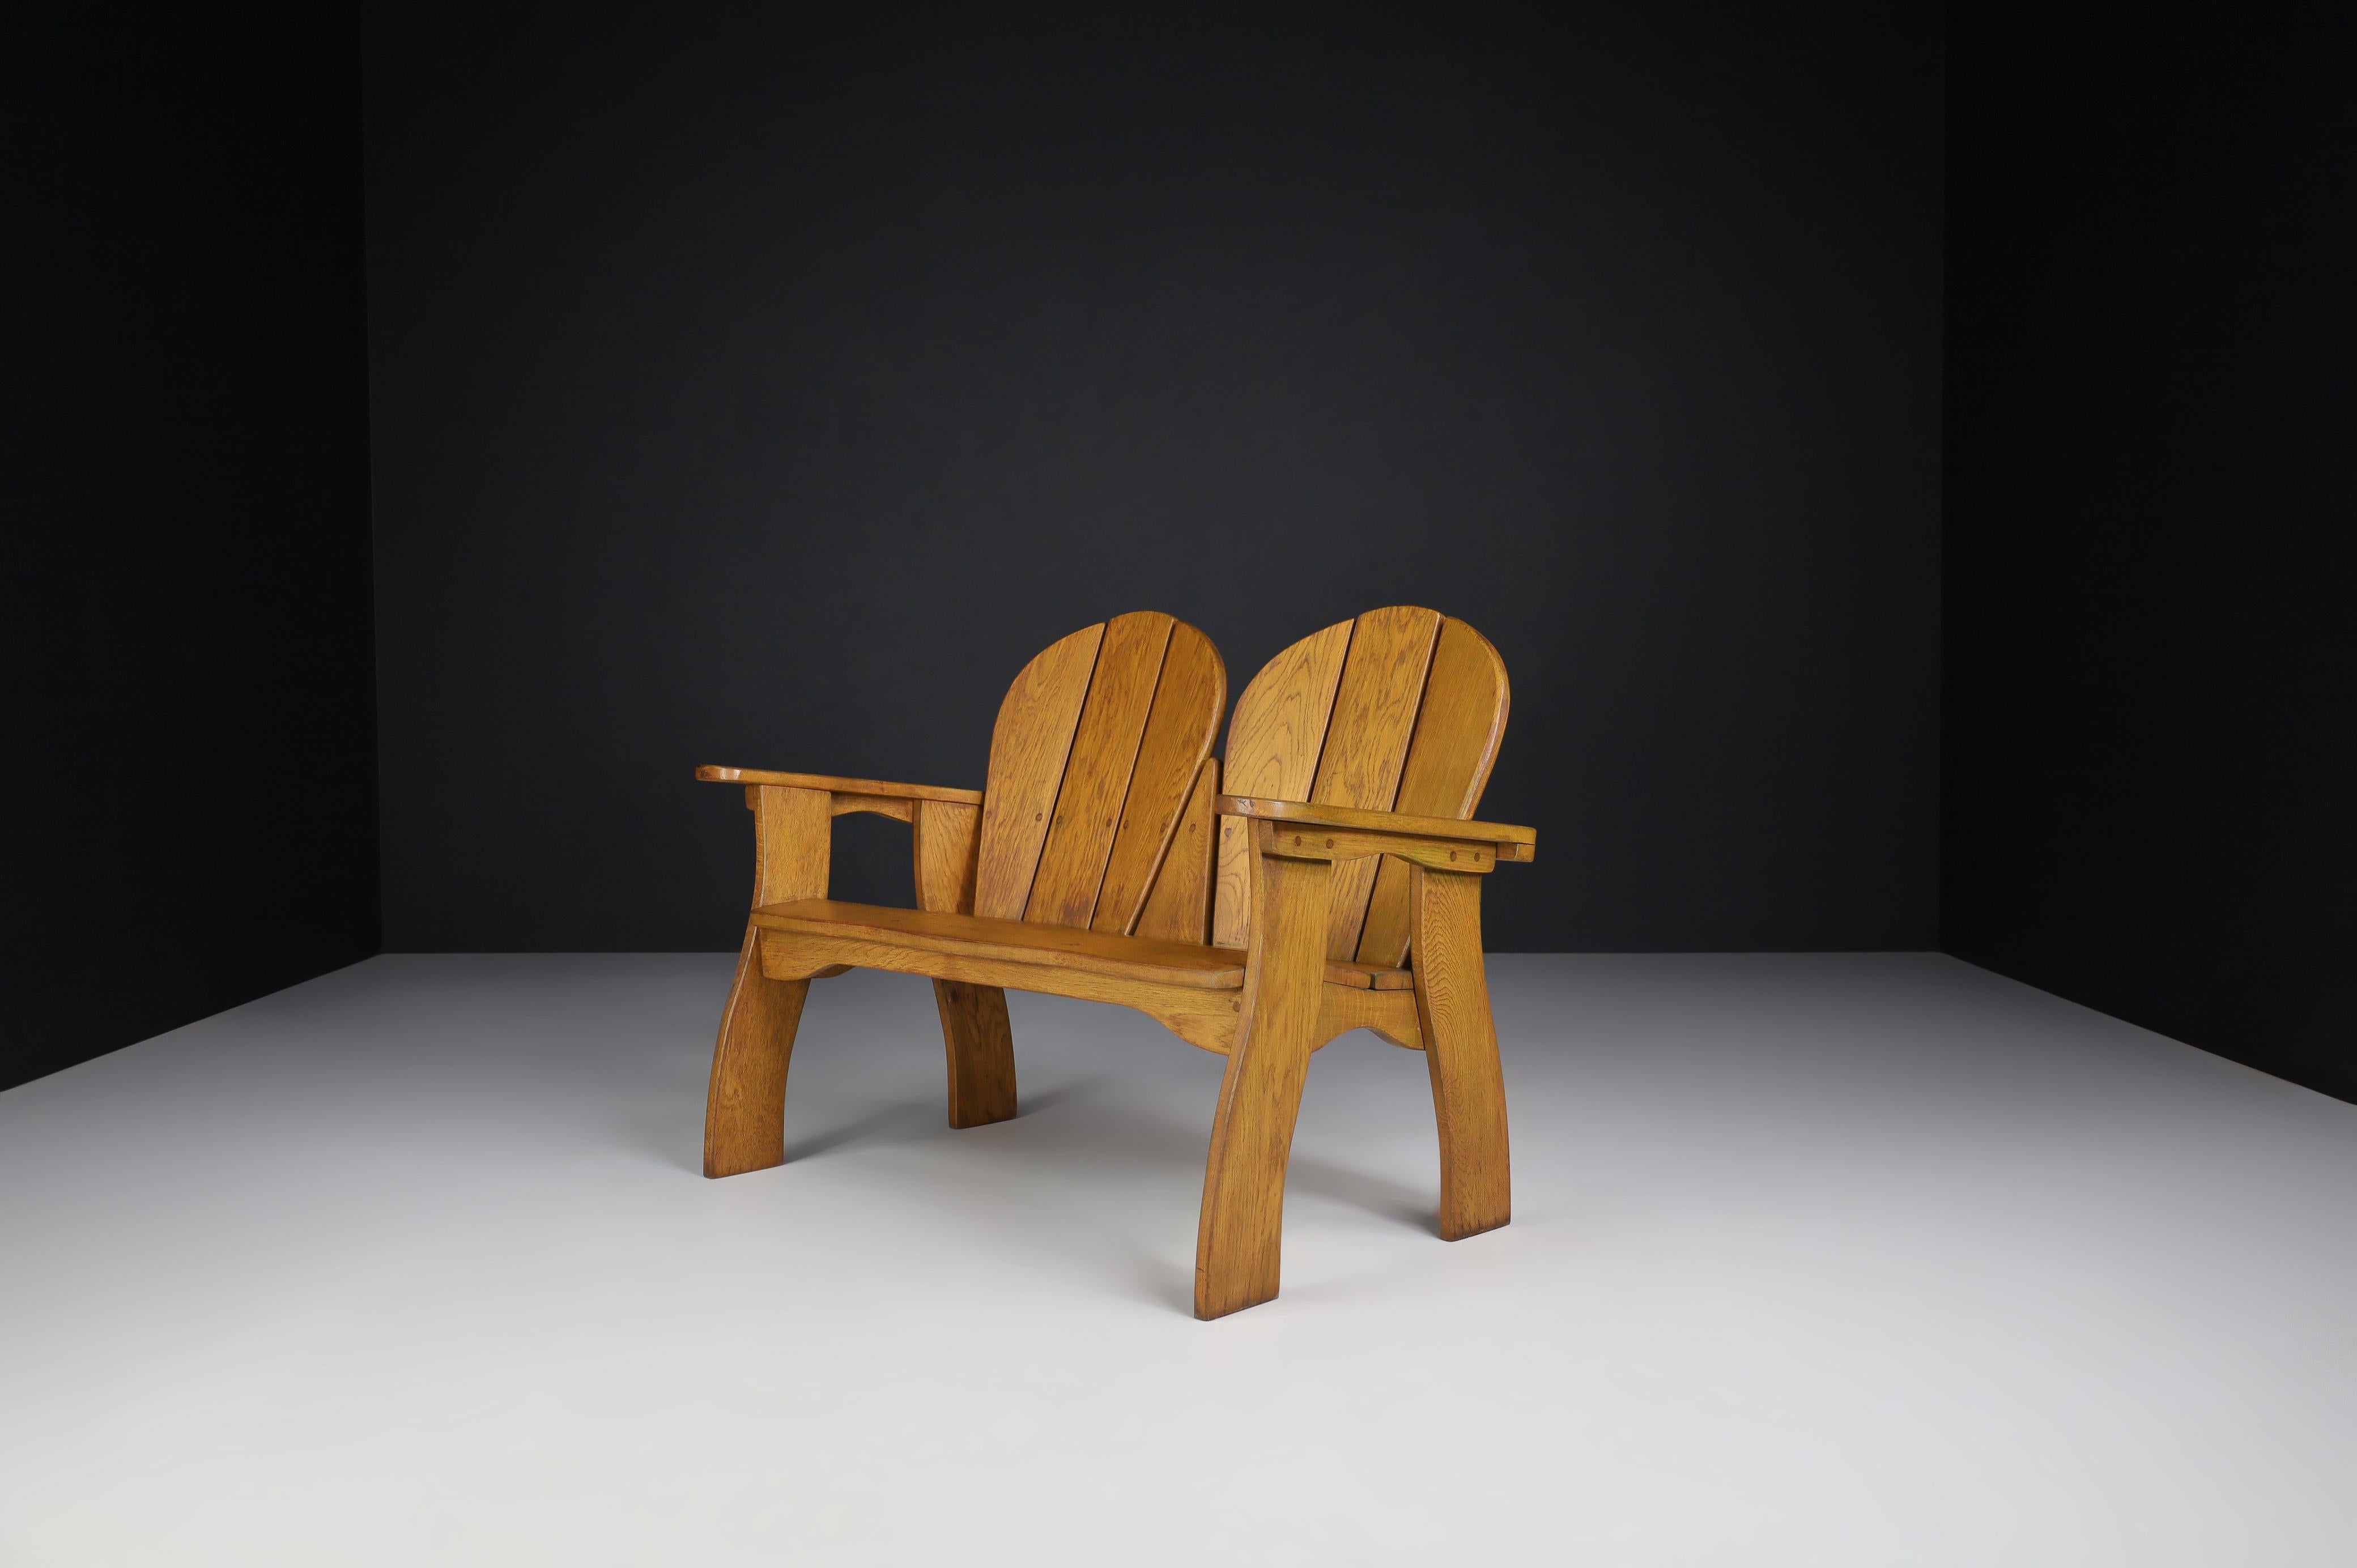 Sculptural bench in oak, France, 1960s. 

Oak sculptural bench, this lovely settee is made of French oak and sculpturally crafted by hand in France in the 1960s. The craftsmanship is still visible; they are made of solid oak wood and constructed